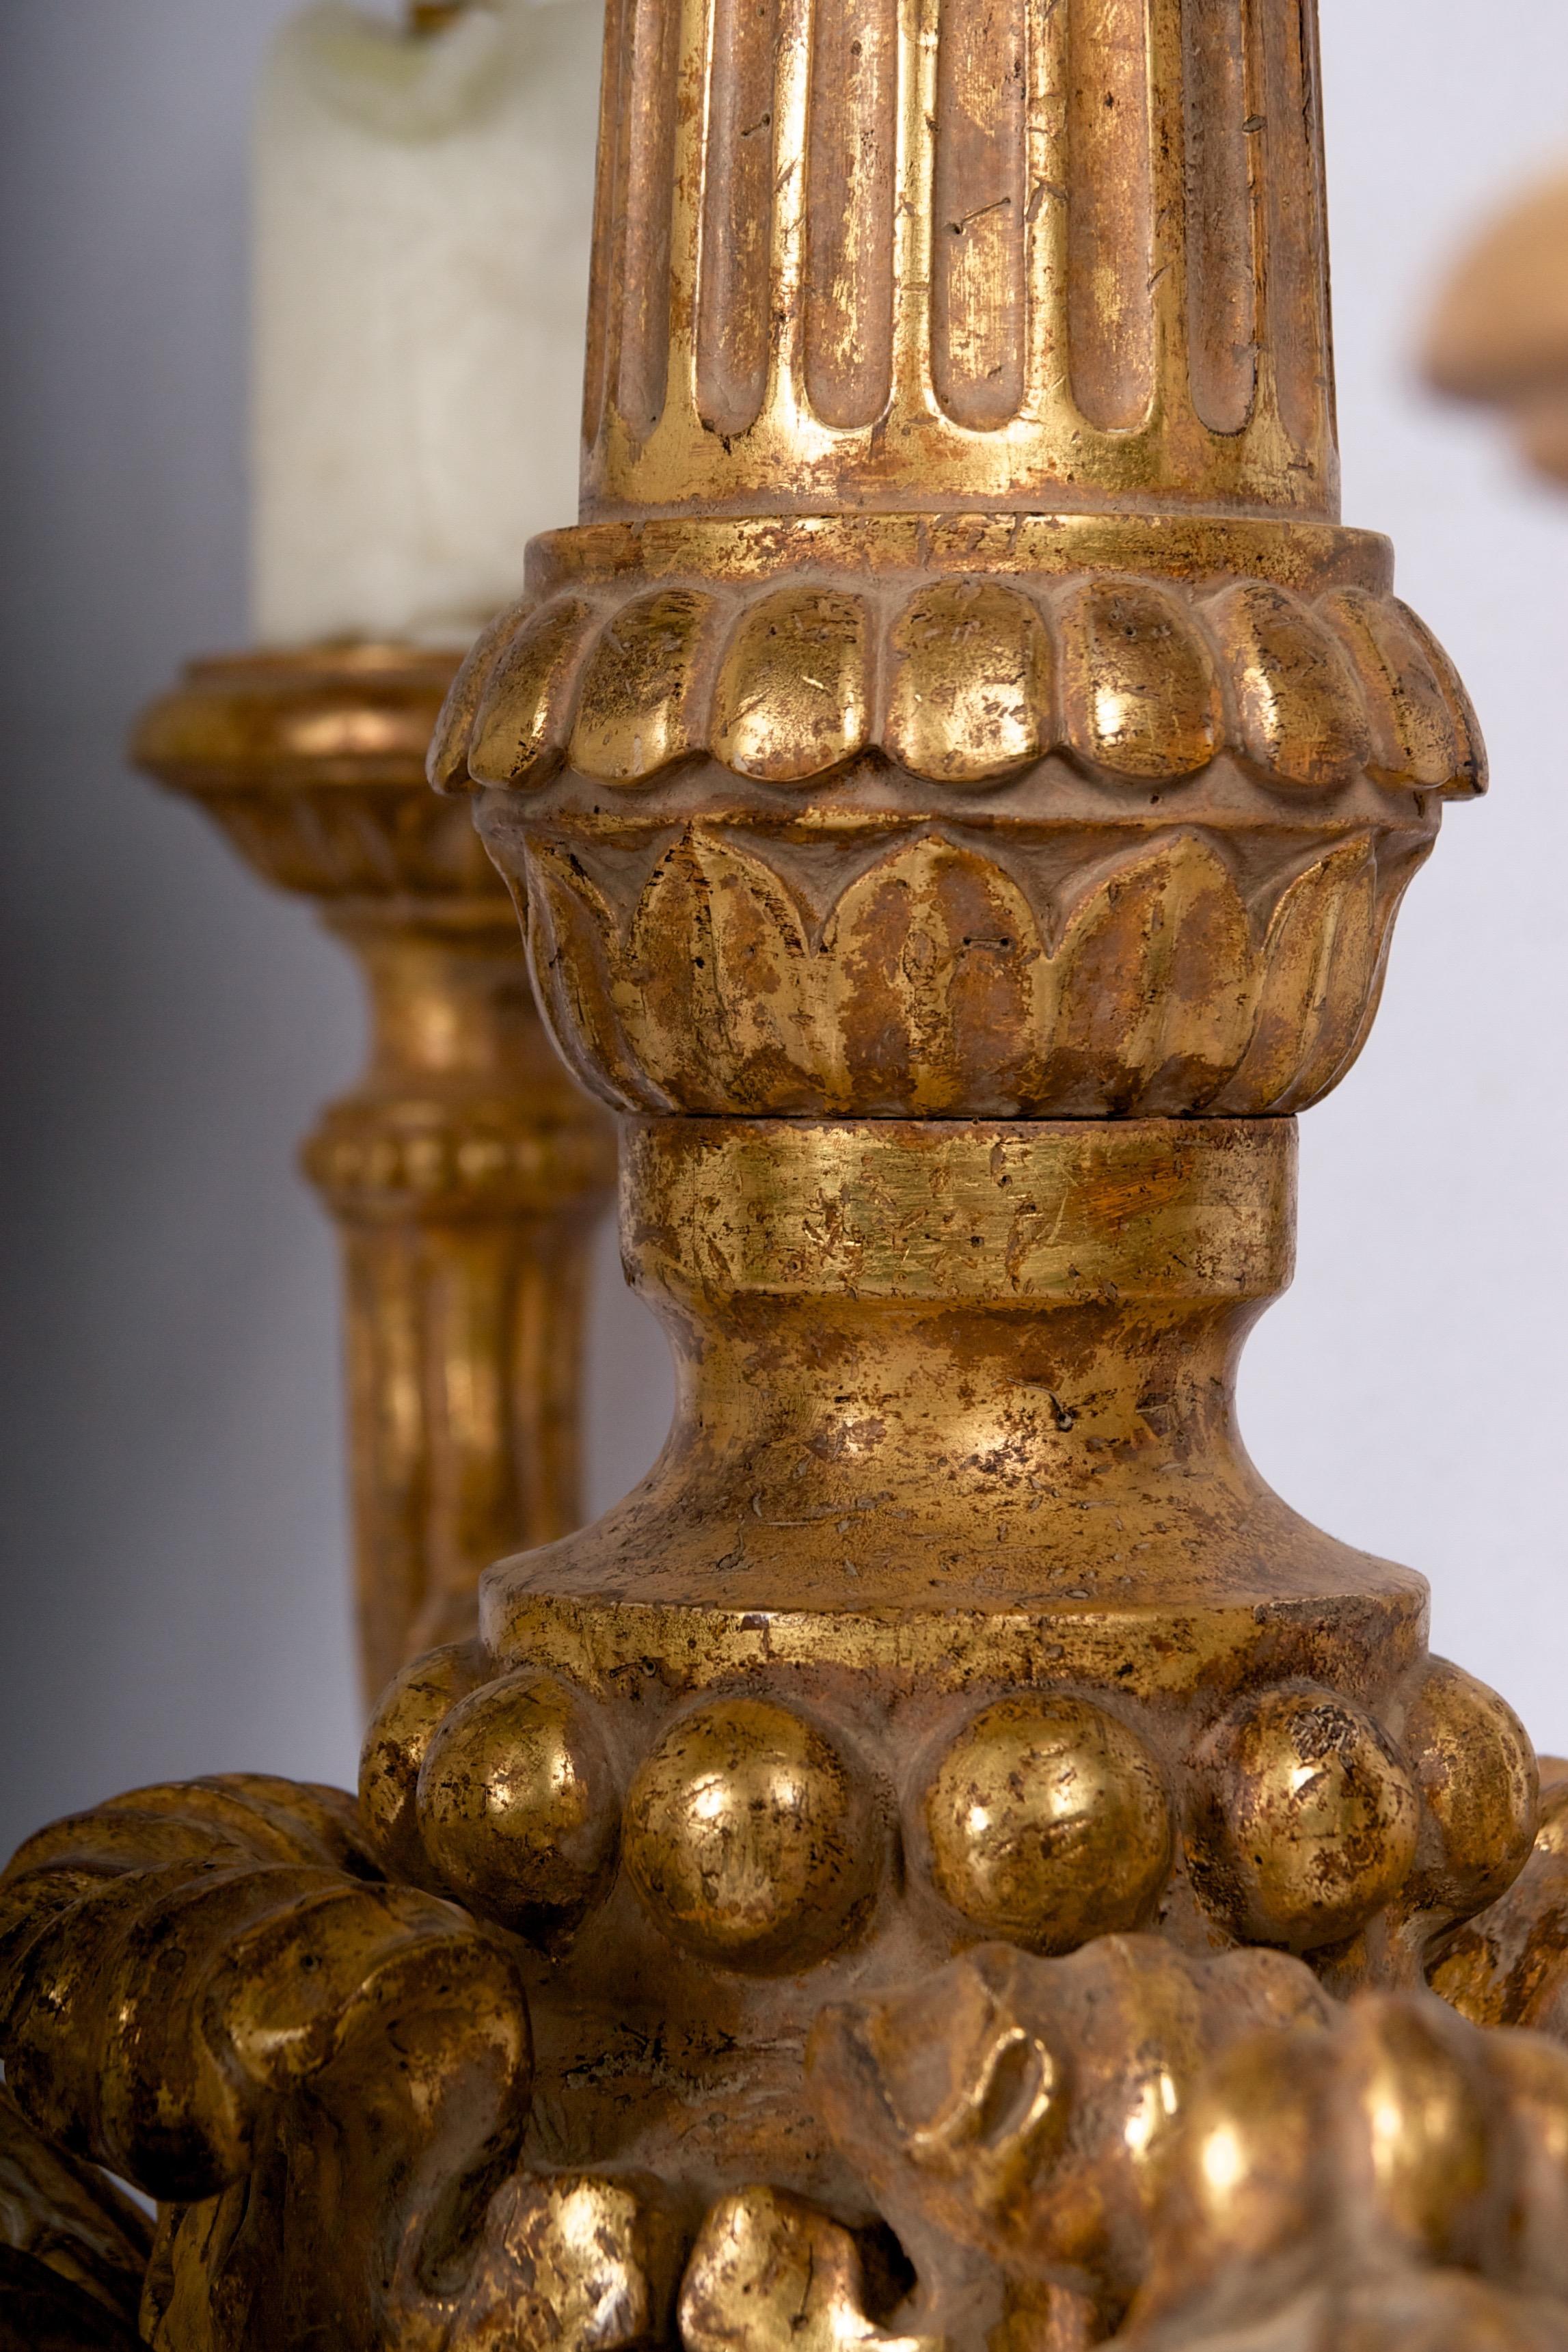 A very substantial hand-carved and gilded chandelier with wonderful wax
candle sleeves and great balanced form.